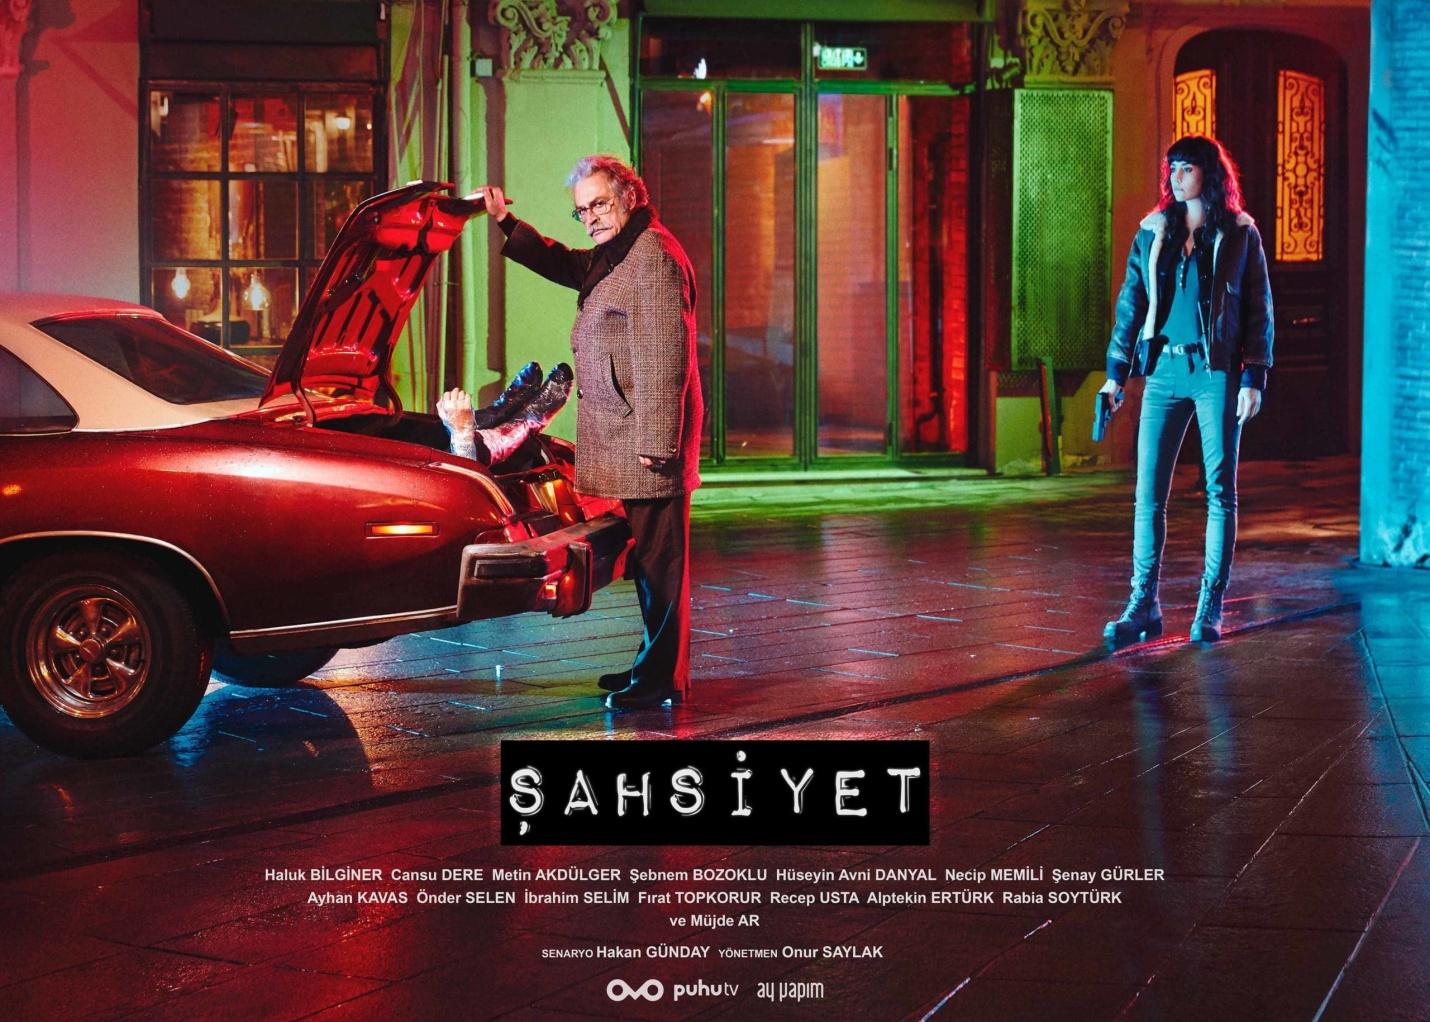 Şahsiyet-Persona was selected as the Best Internet Series. (Image Credit-Noluyo)